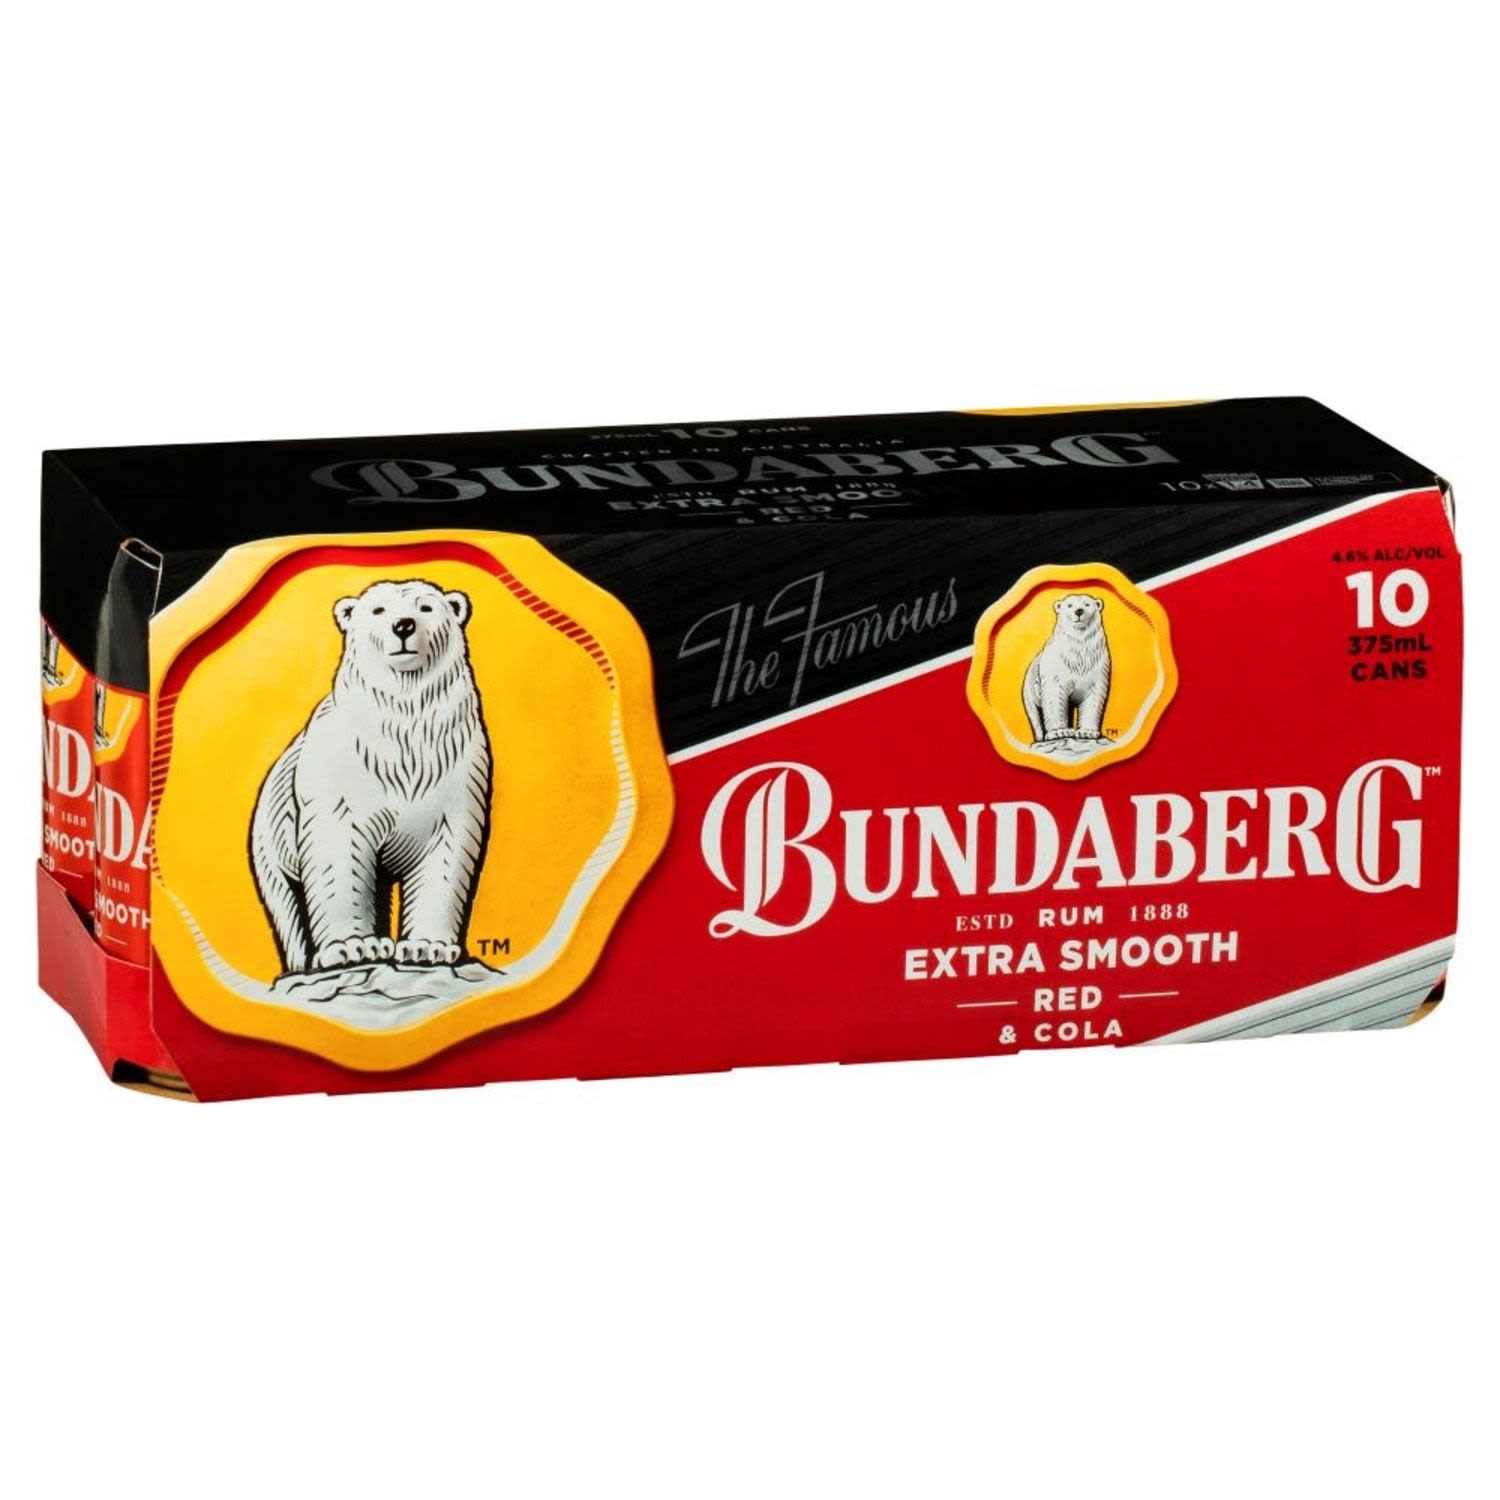 Bundaberg Extra Smooth Red Rum & Cola Can 375mL 10 Pack